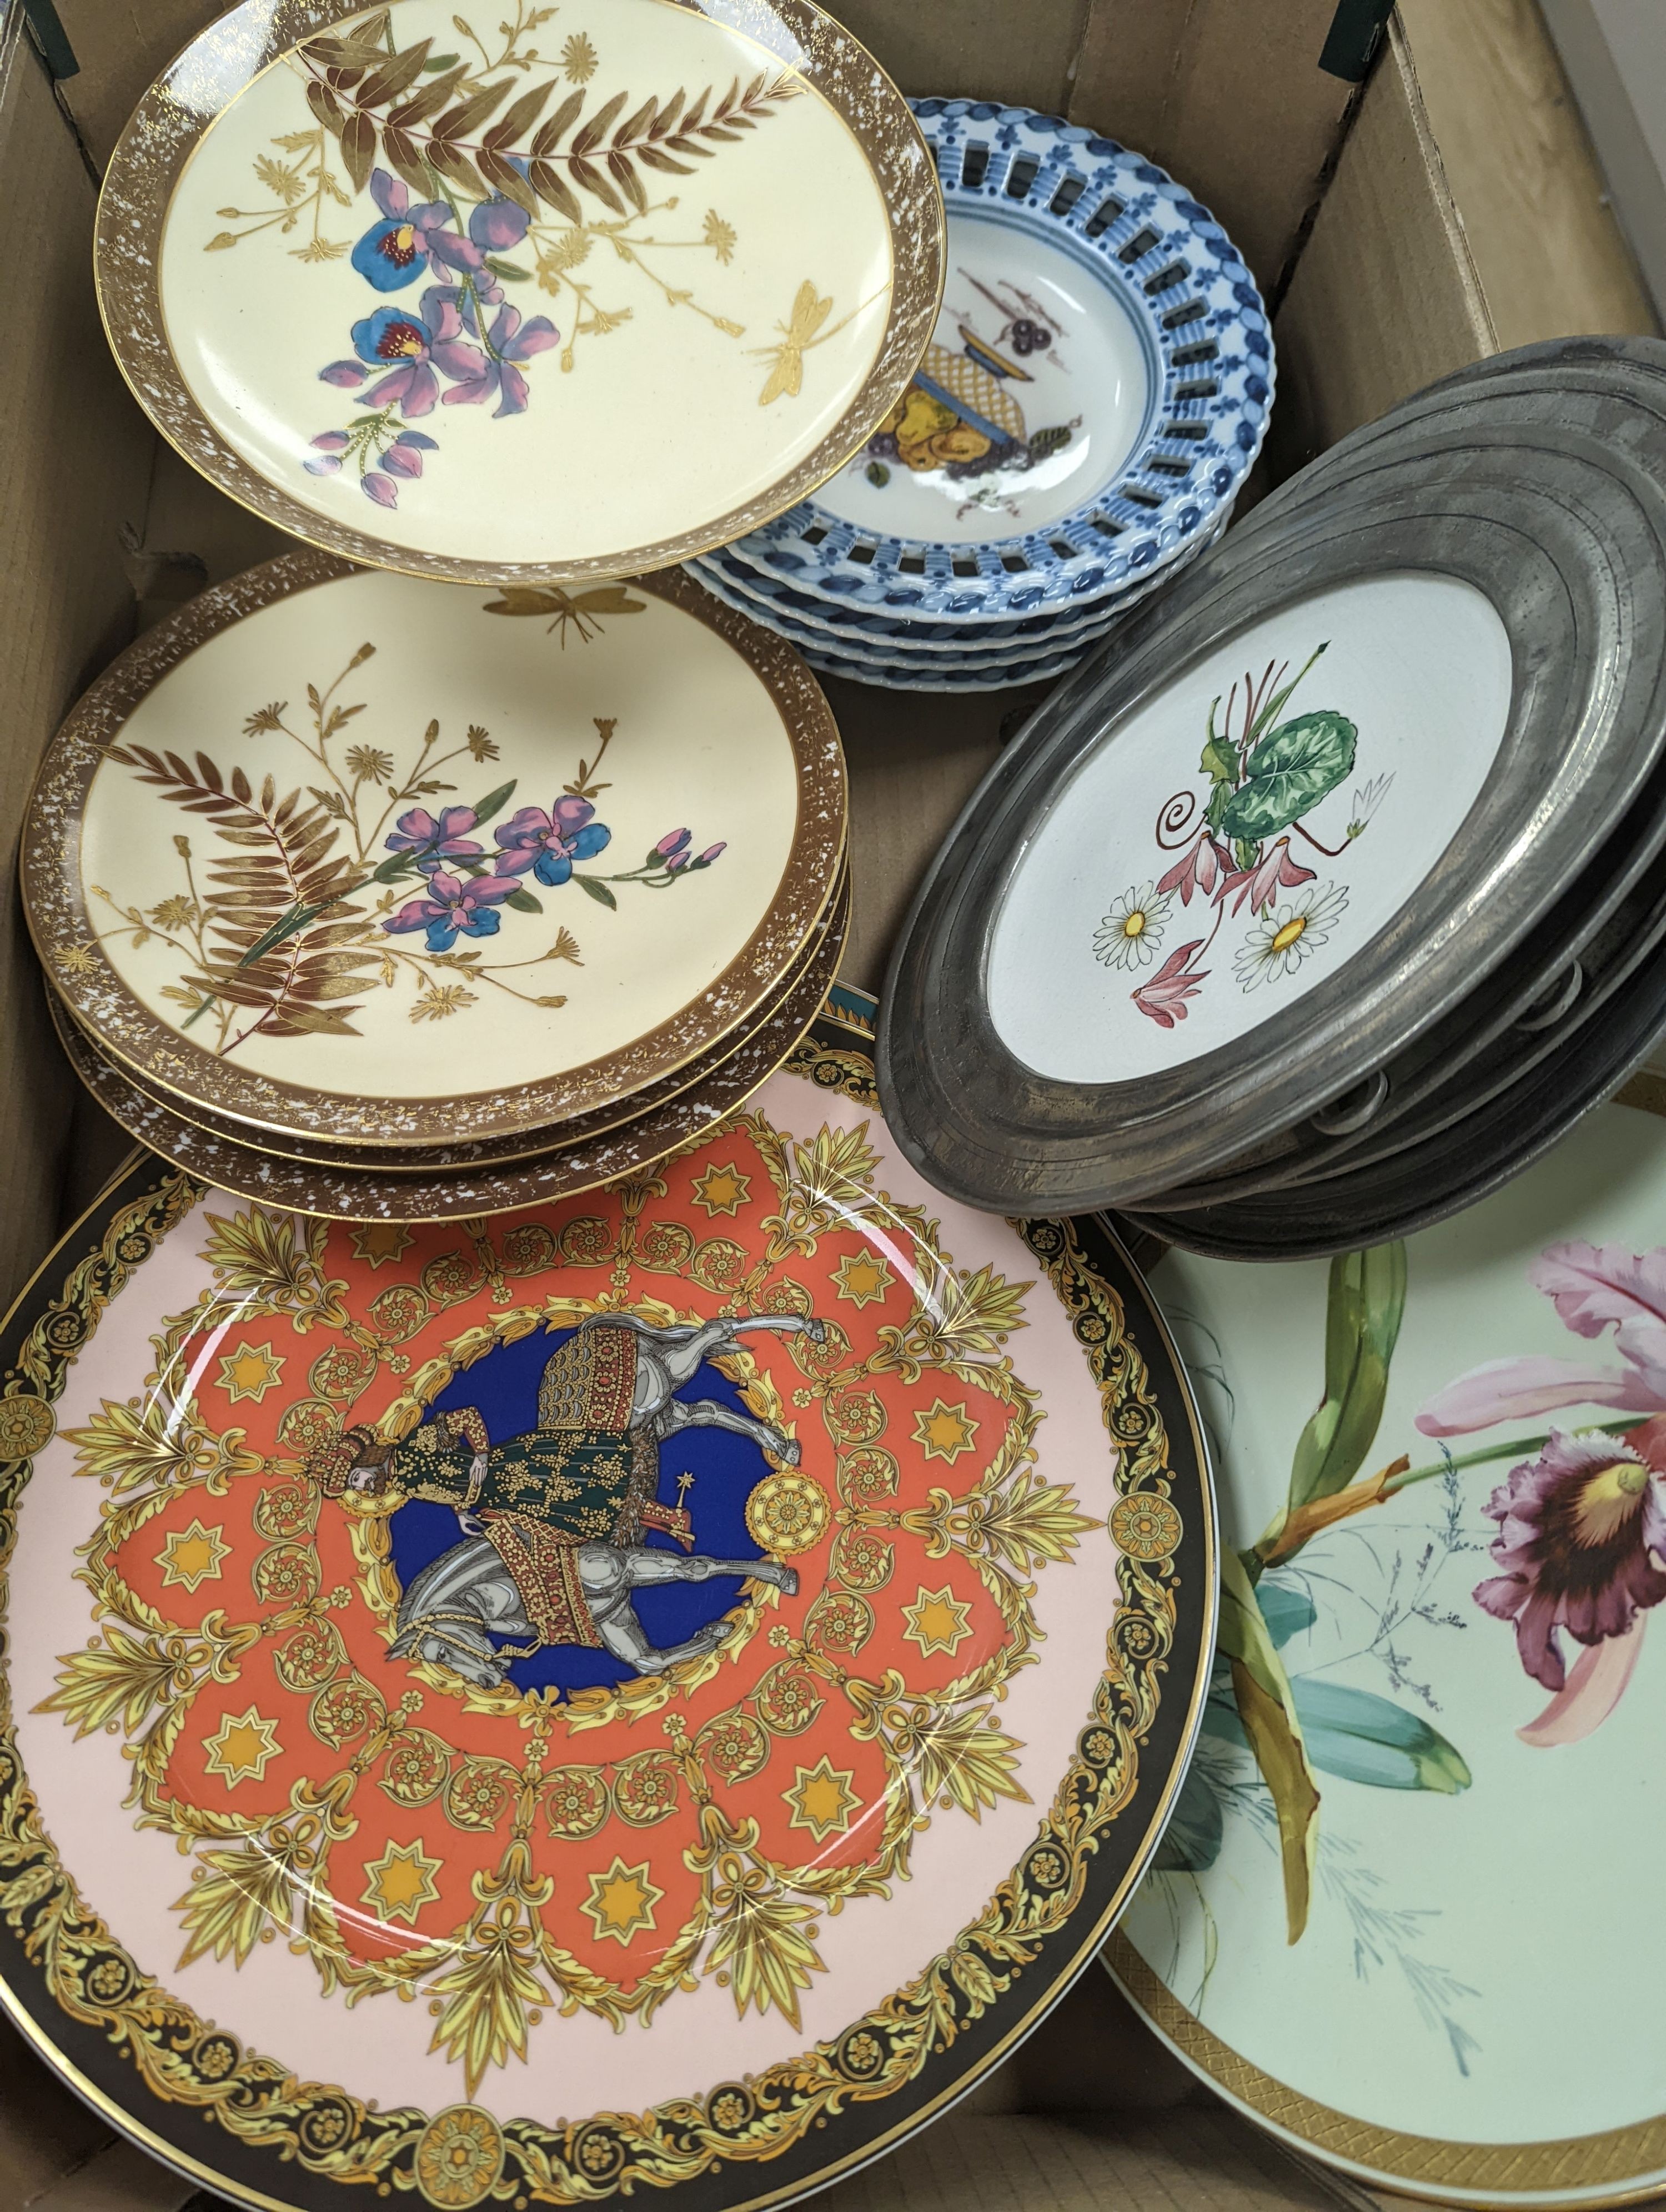 A collection of French pewter and ceramic plates, a set of Dutch fruit plates and a 2 part dessert service, large Rosenthal studioline Versace plates